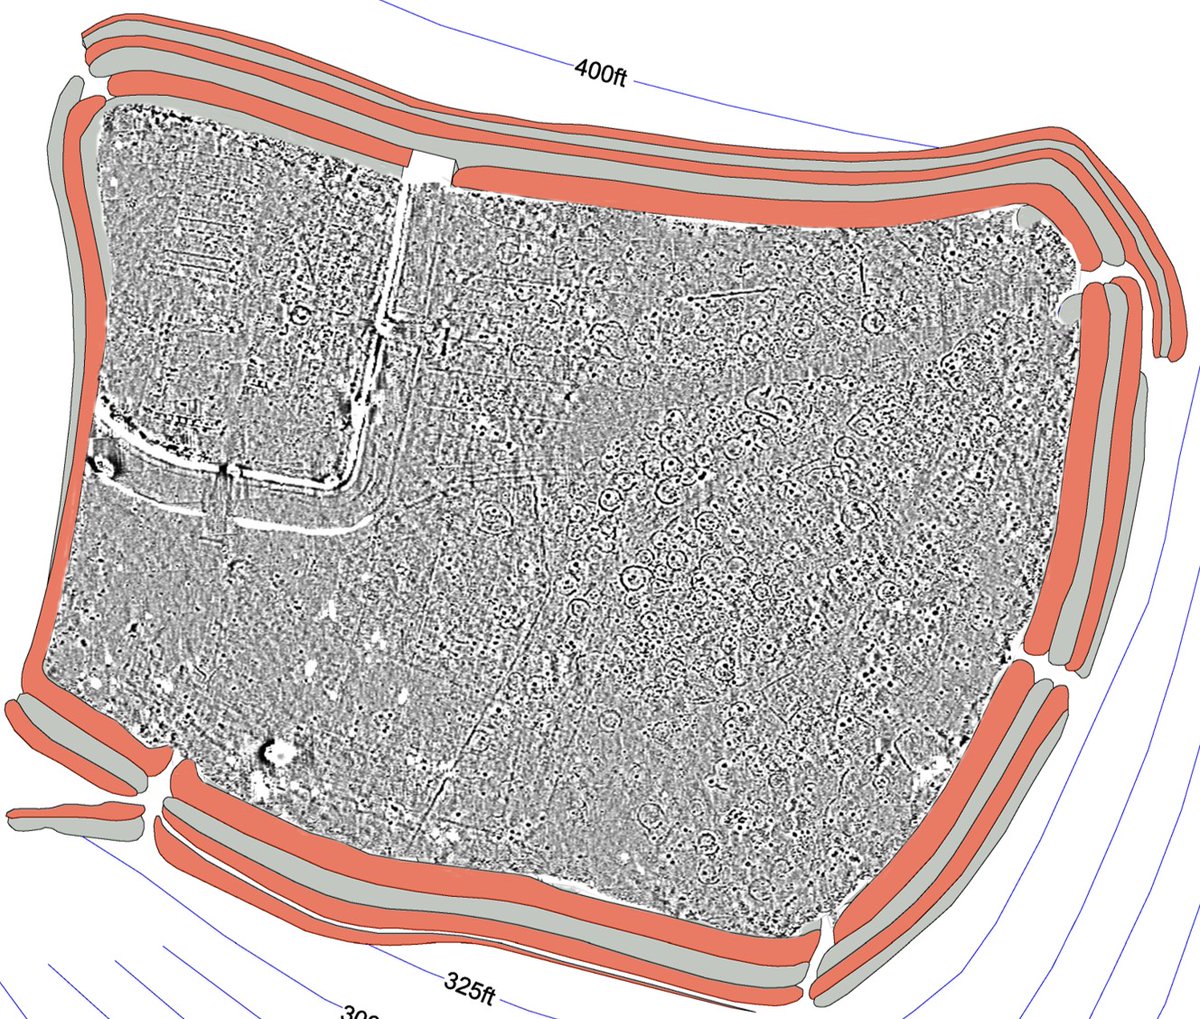 Most discussion of Hod Hill  #Dorset  @nationaltrust centres on the death of the Iron Age hillfort. We wanted to focus on its life, therefore conducted a geophysical survey of the interiorHere it is © Dave Stewart and Bournemouth University  #HillfortsWednesday  #LoveGeofiz